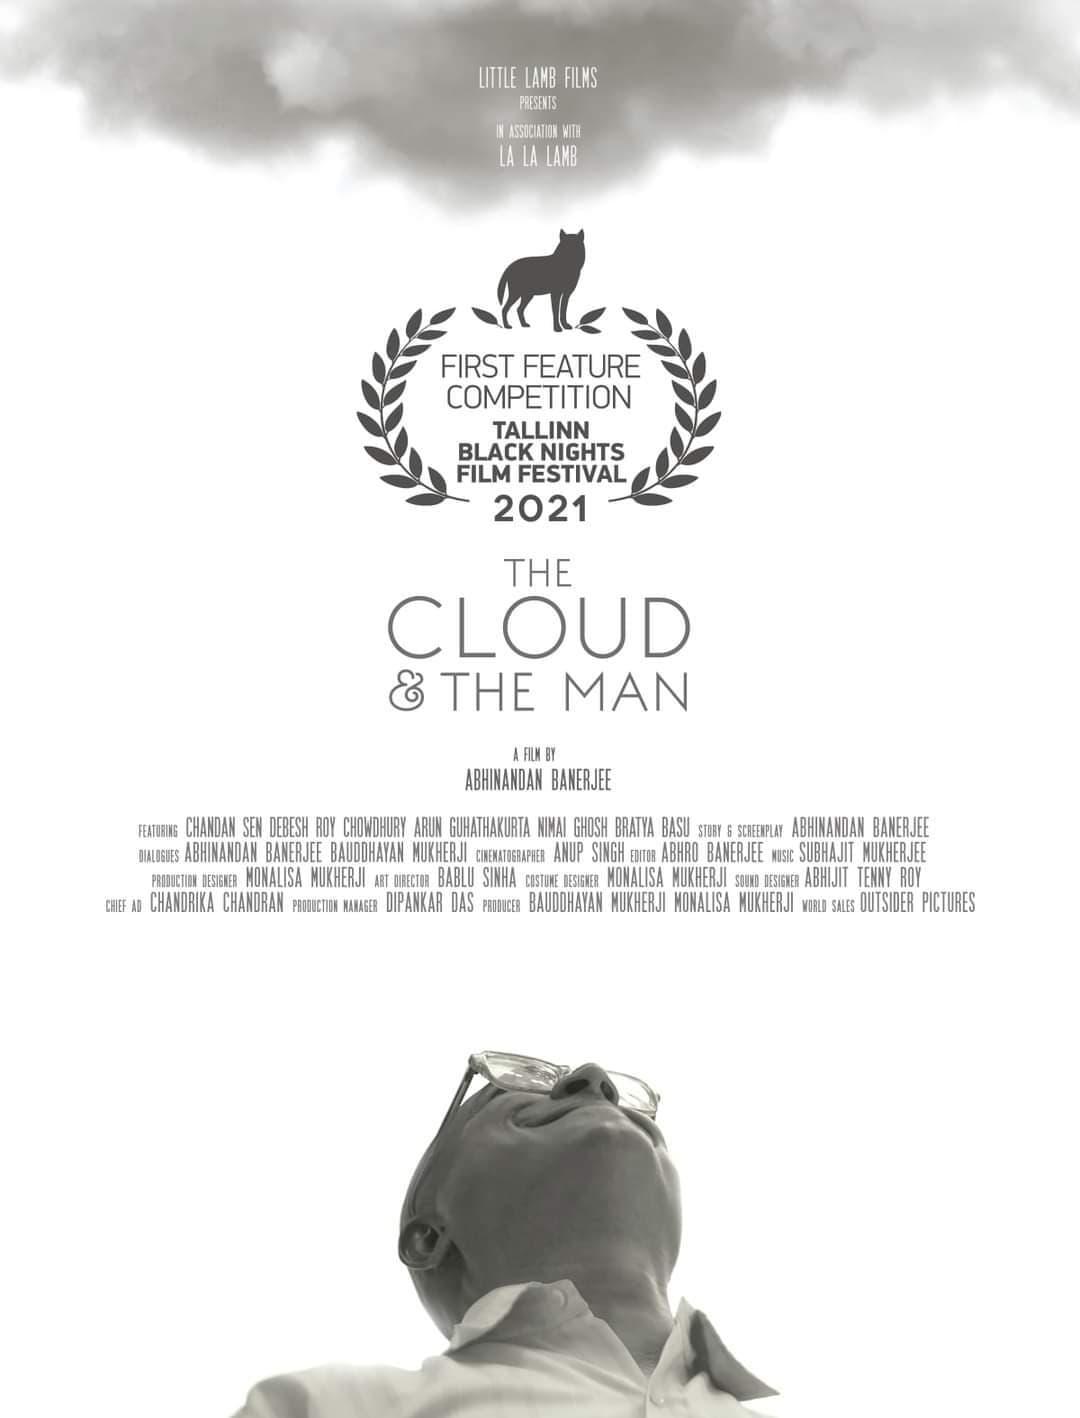 The Cloud & the Man poster